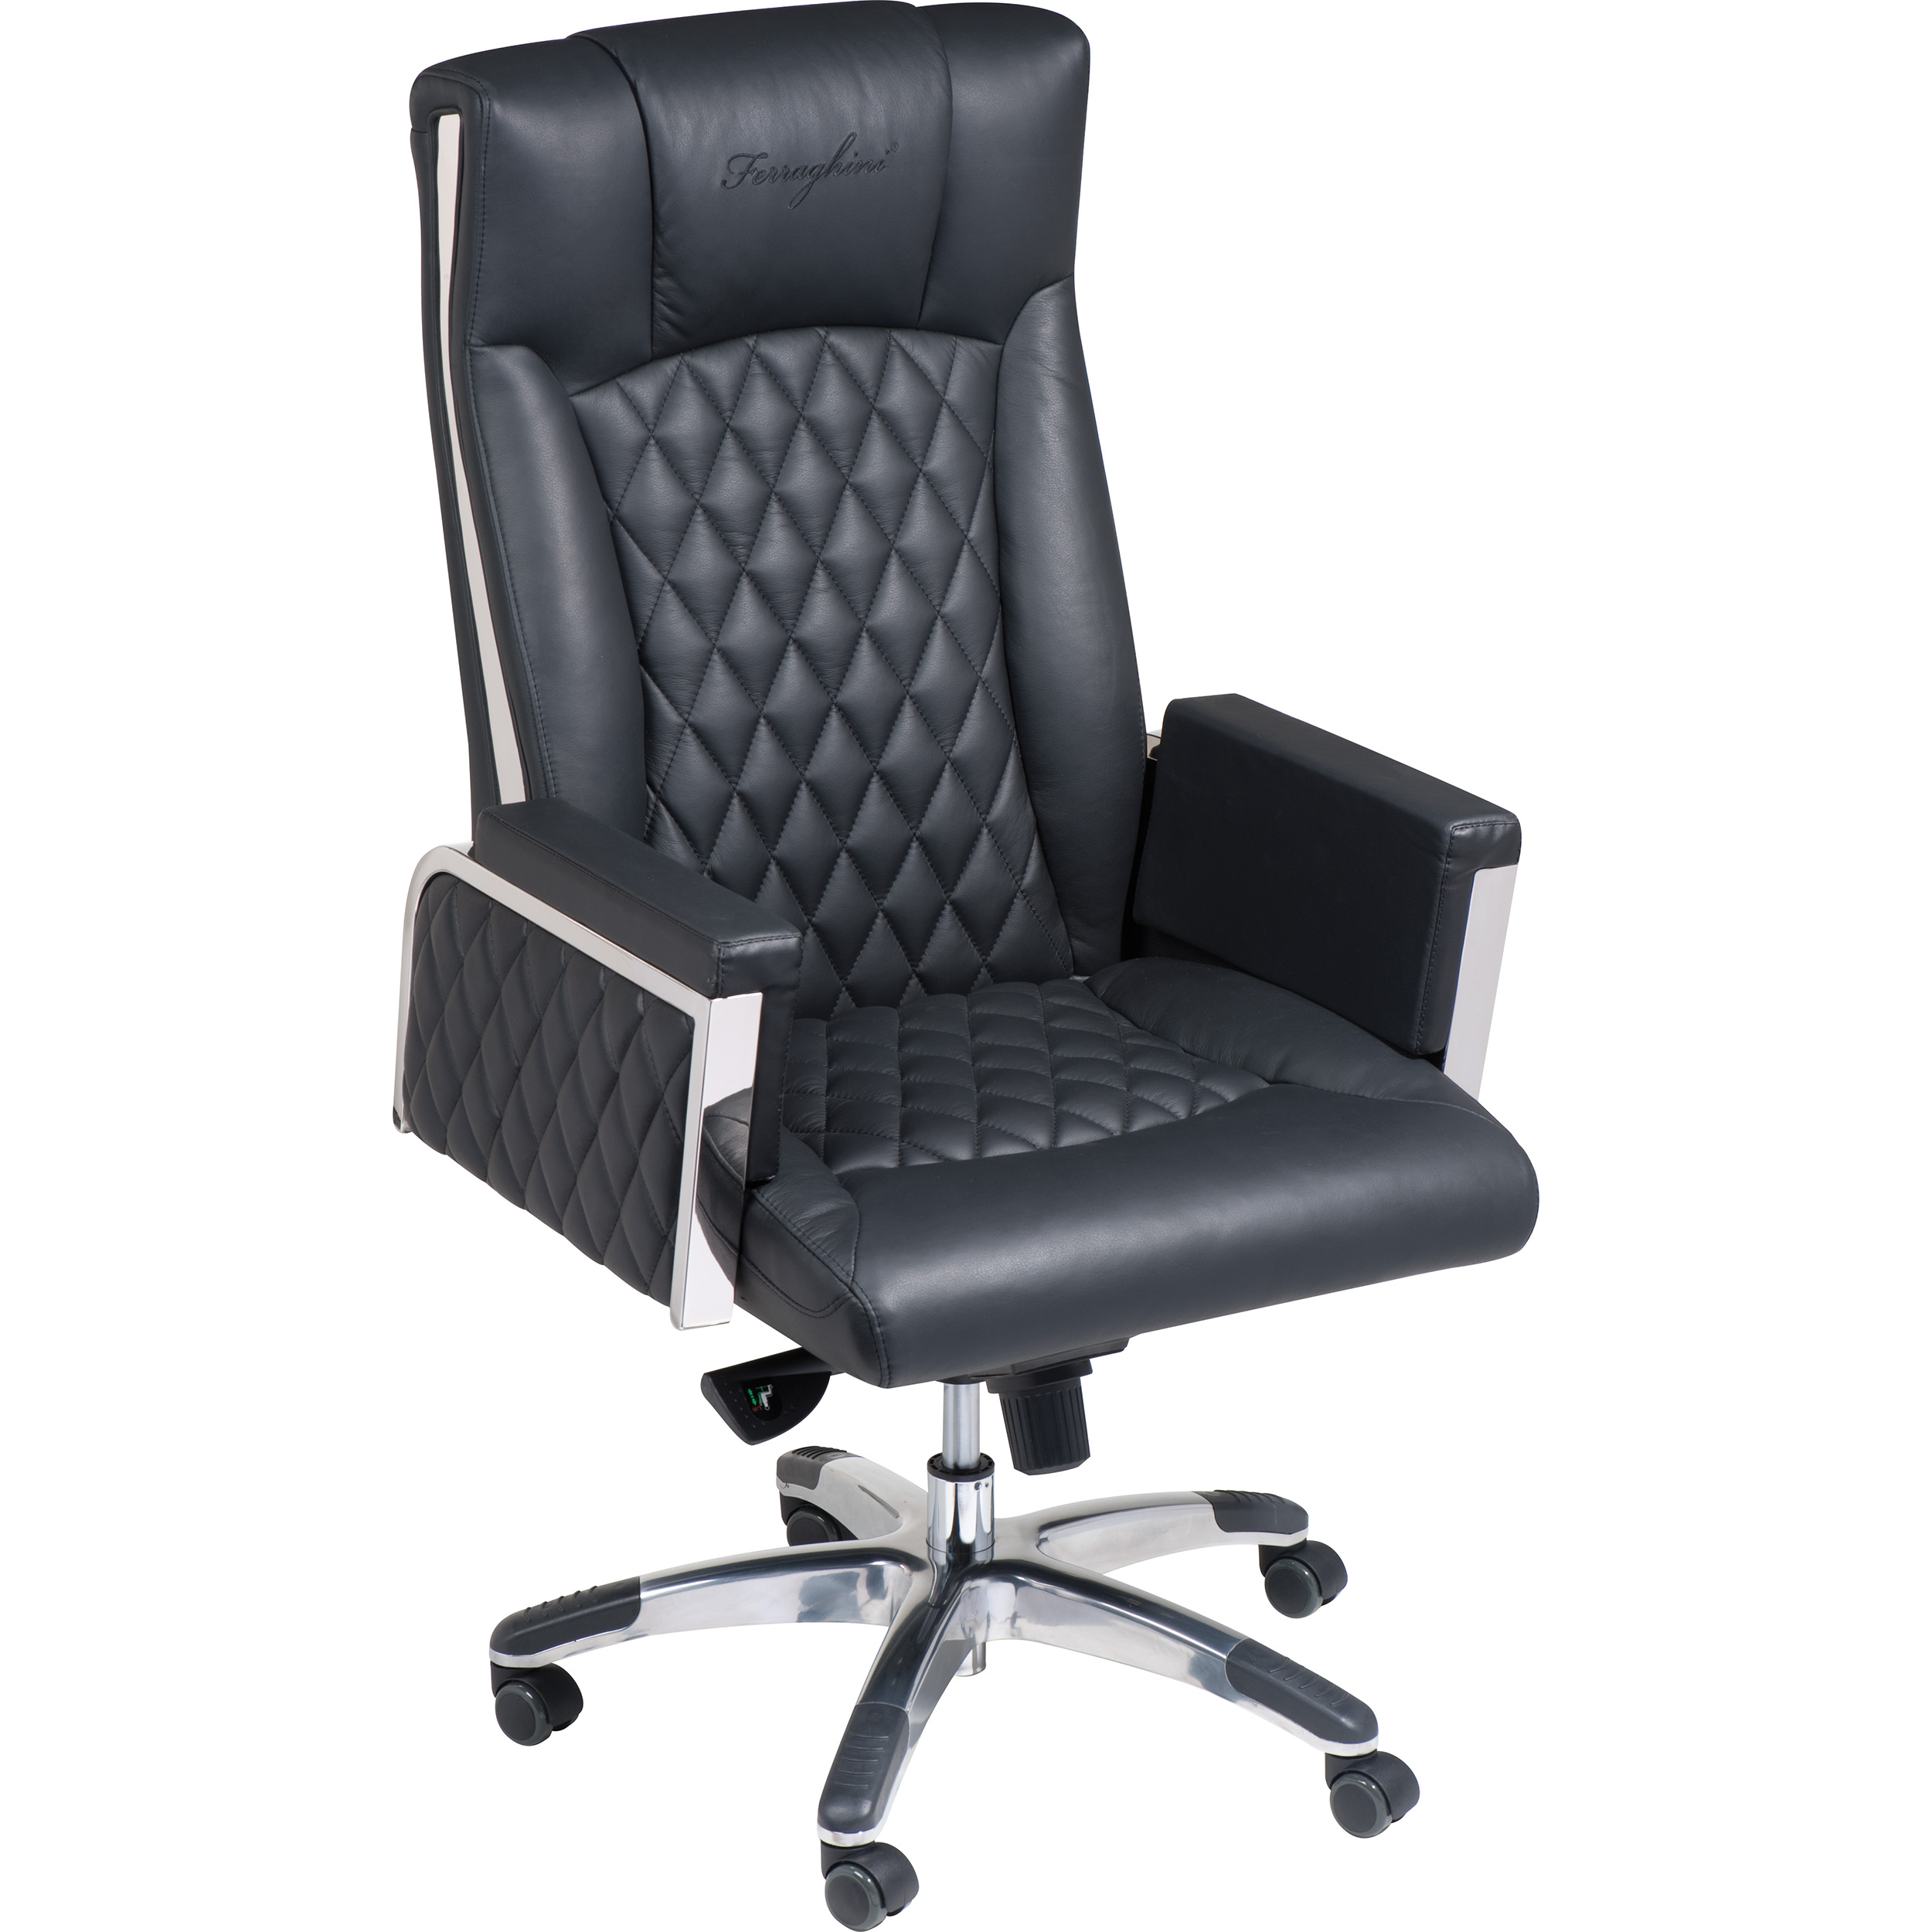 Ferraghini office chair with broad arm rest